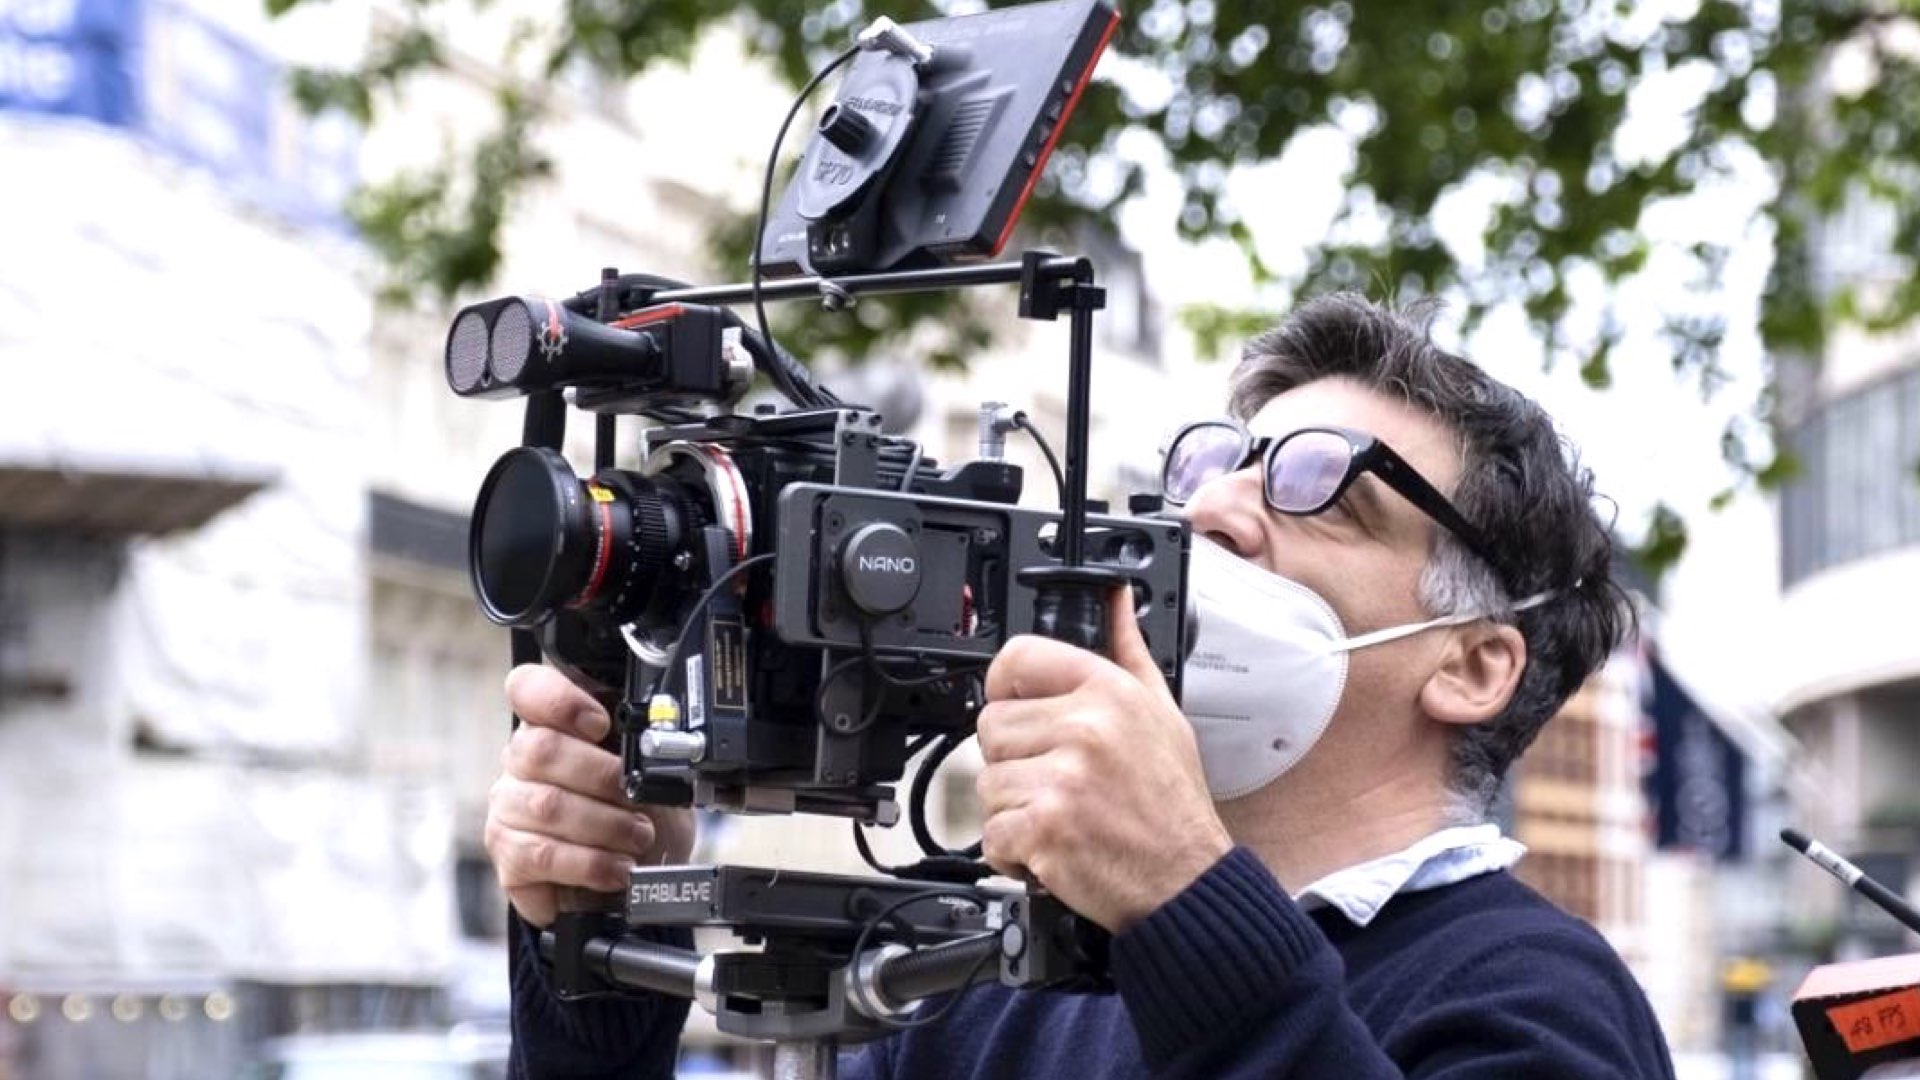 Behind the scenes of The Flash: Henry Braham, BSC with the Stabileye Nano. Source: RED Digital Cinema and Warner Bros Pictures